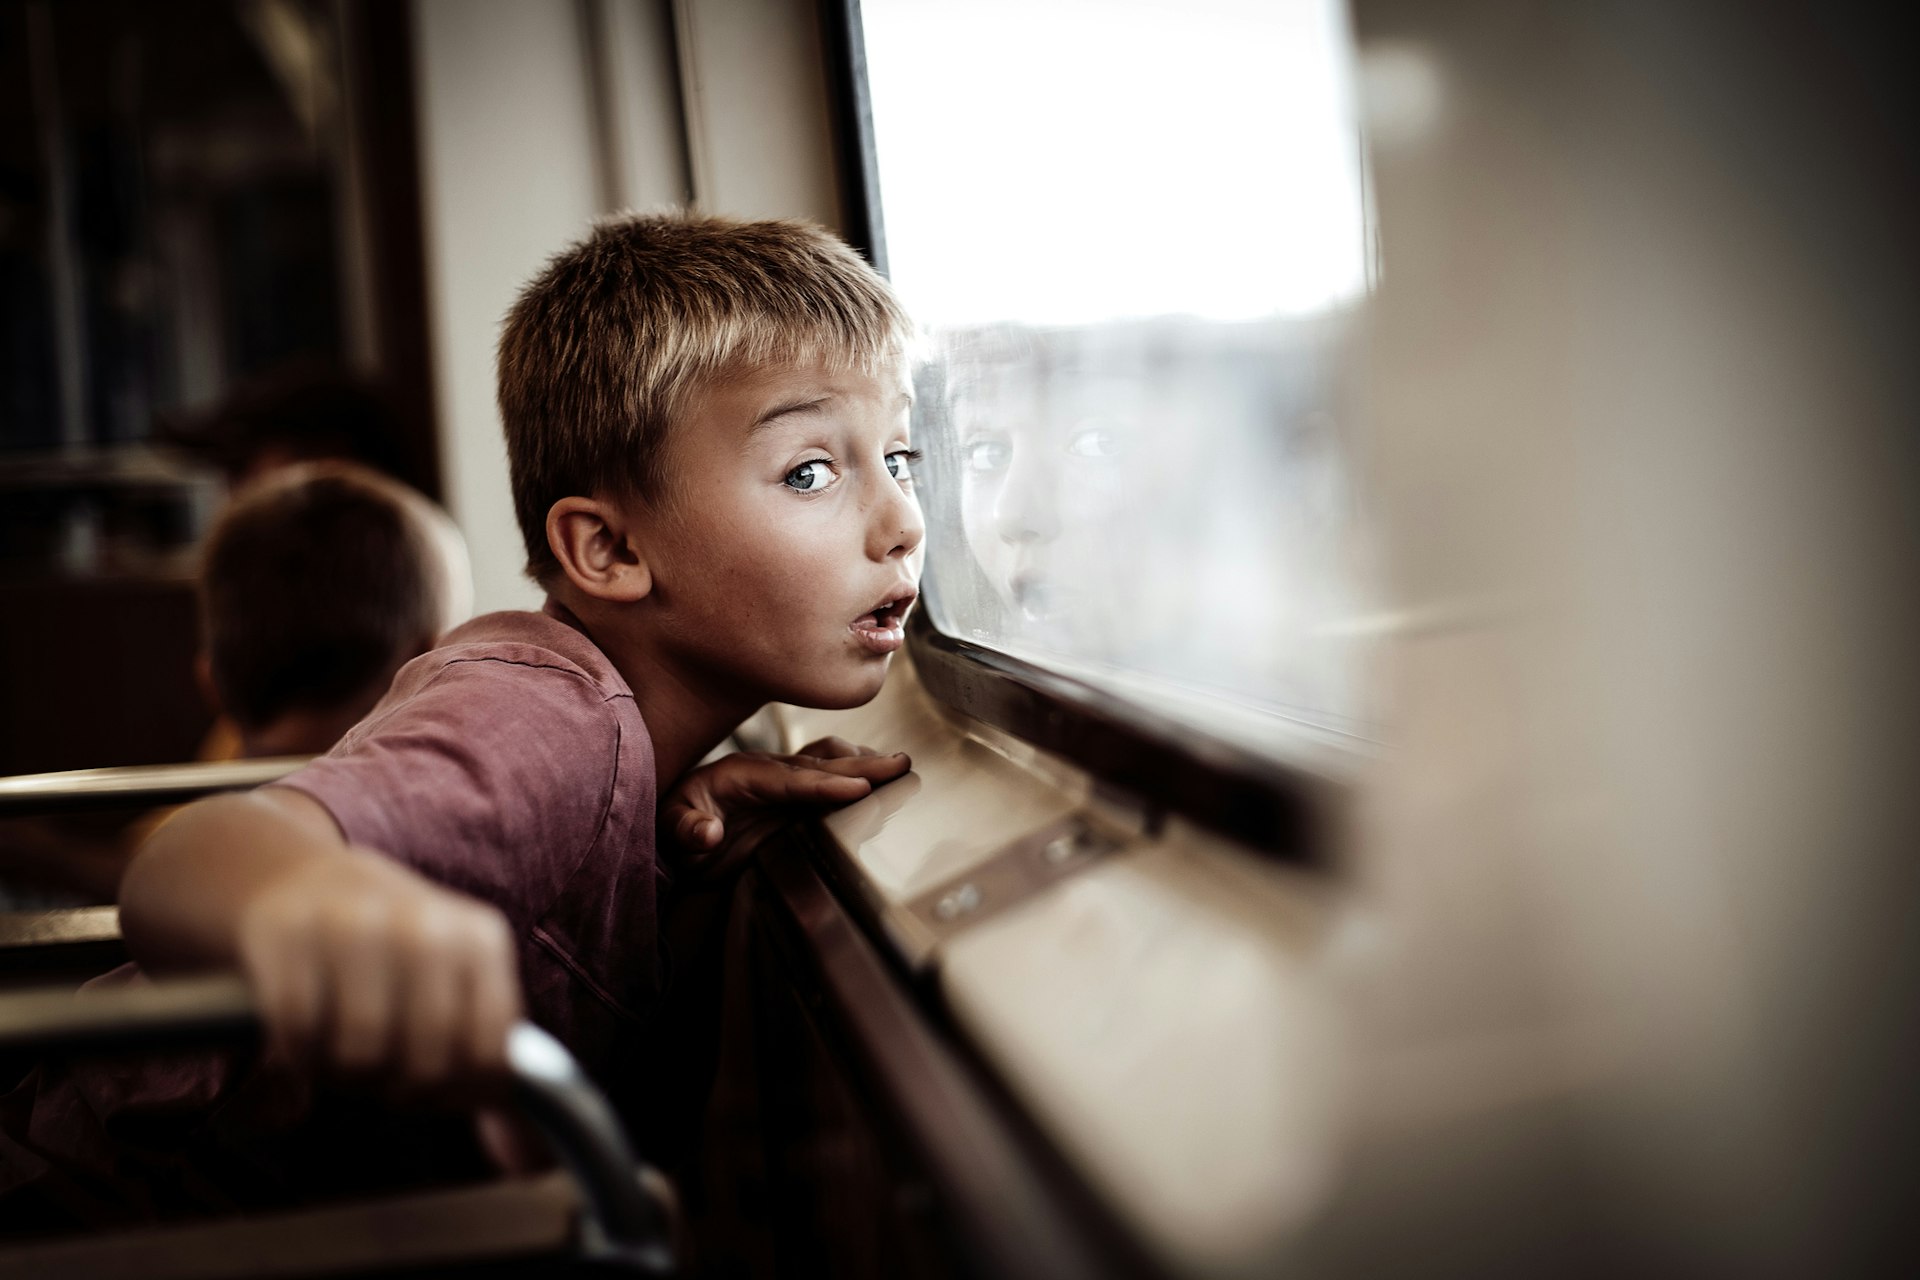 A boy looks out the window on an elevated train (“L”) in Chicago, Illinois, Midwest, USA